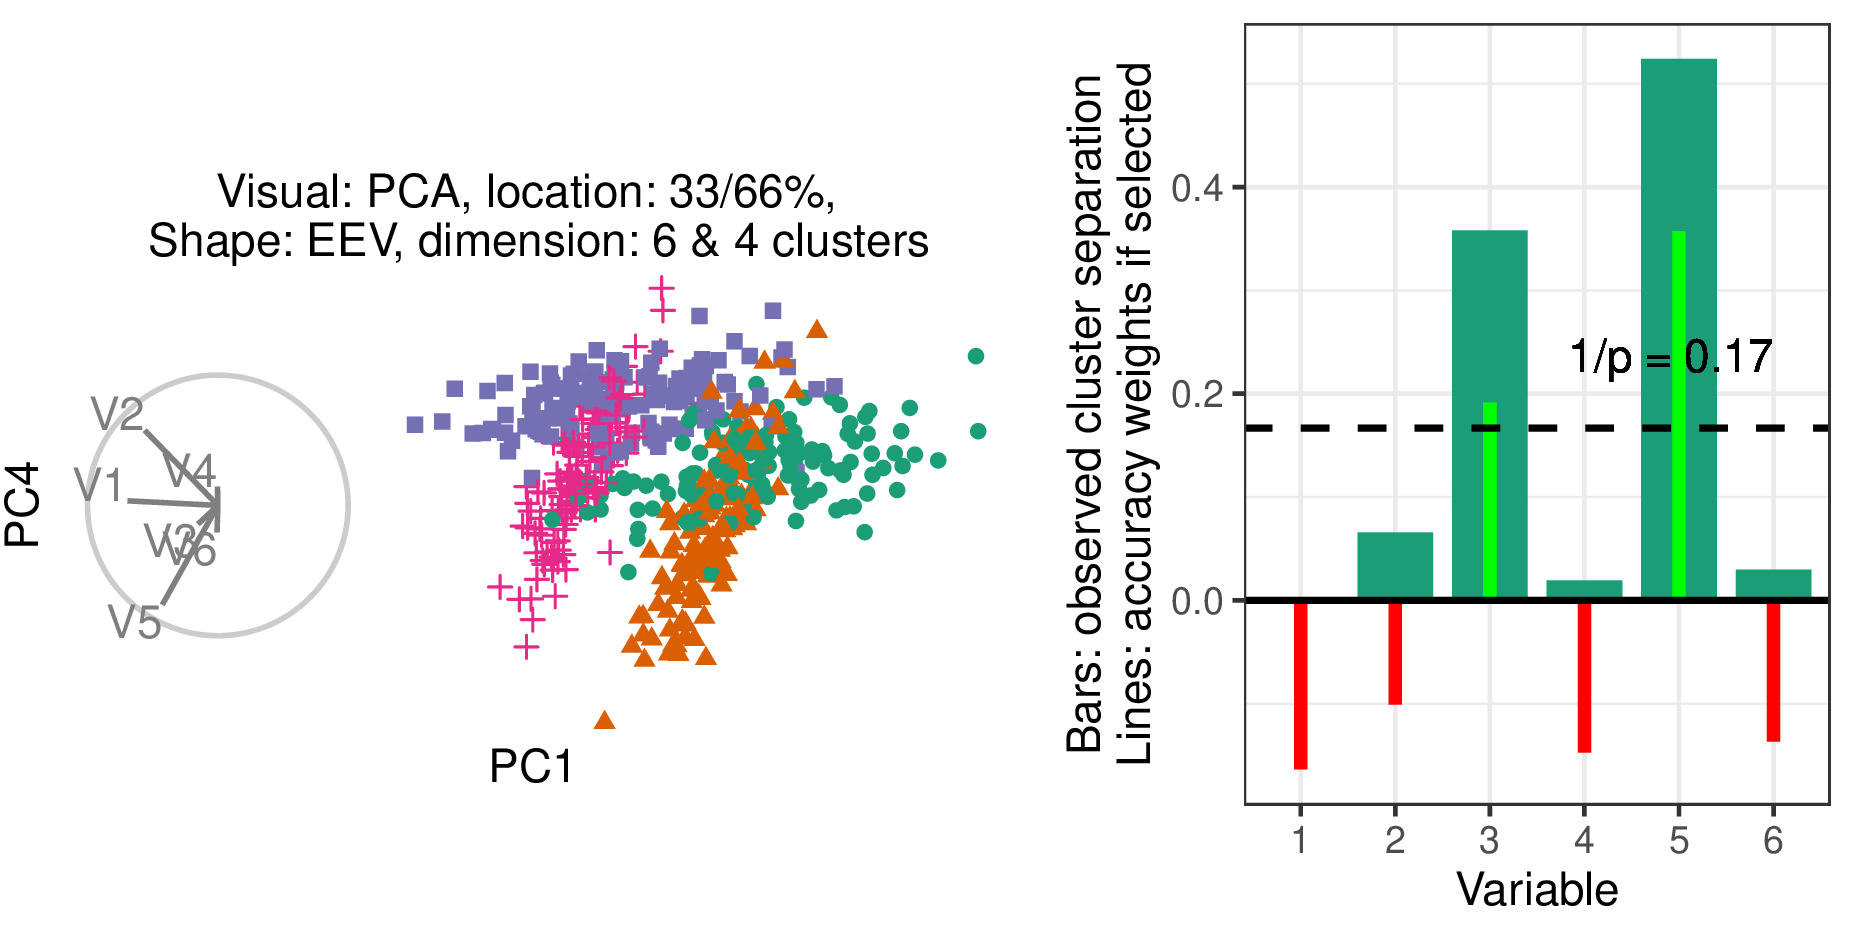 Illustration of how accuracy is measured. (L), Scatterplot and biplot of PC1 by PC4 of a simulated data set (R) illustrates cluster separation between the green circles and orange triangles. Bars indicate observed cluster separation, and (red/green) lines show the accuracy weights for the variables if selected. The horizontal dashed line is $1 / p$, the expected value of cluster separation. The accuracy weights equal the signed square of the difference between each variable value and the dashed line.